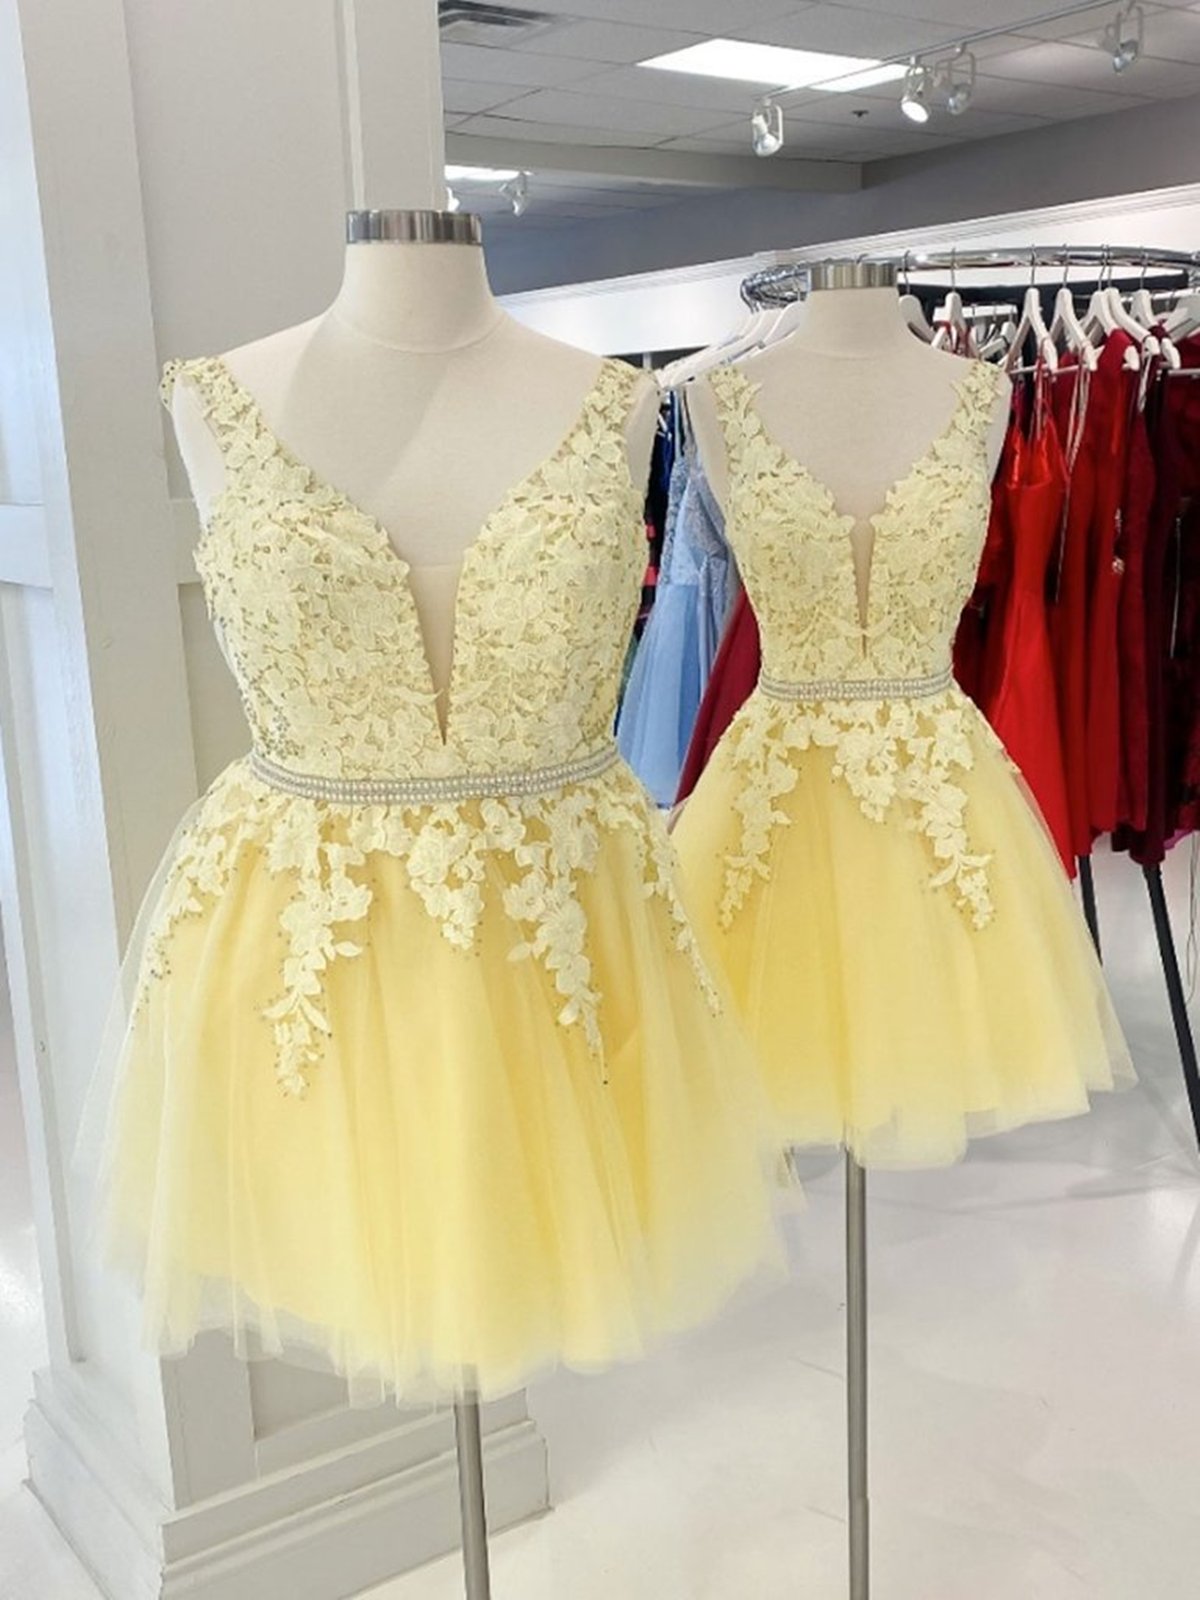 Prom Dresses With Shorts, A Line V Neck Short Yellow Lace Prom Dresses, Short Yellow Lace Graduation Homecoming Dresses